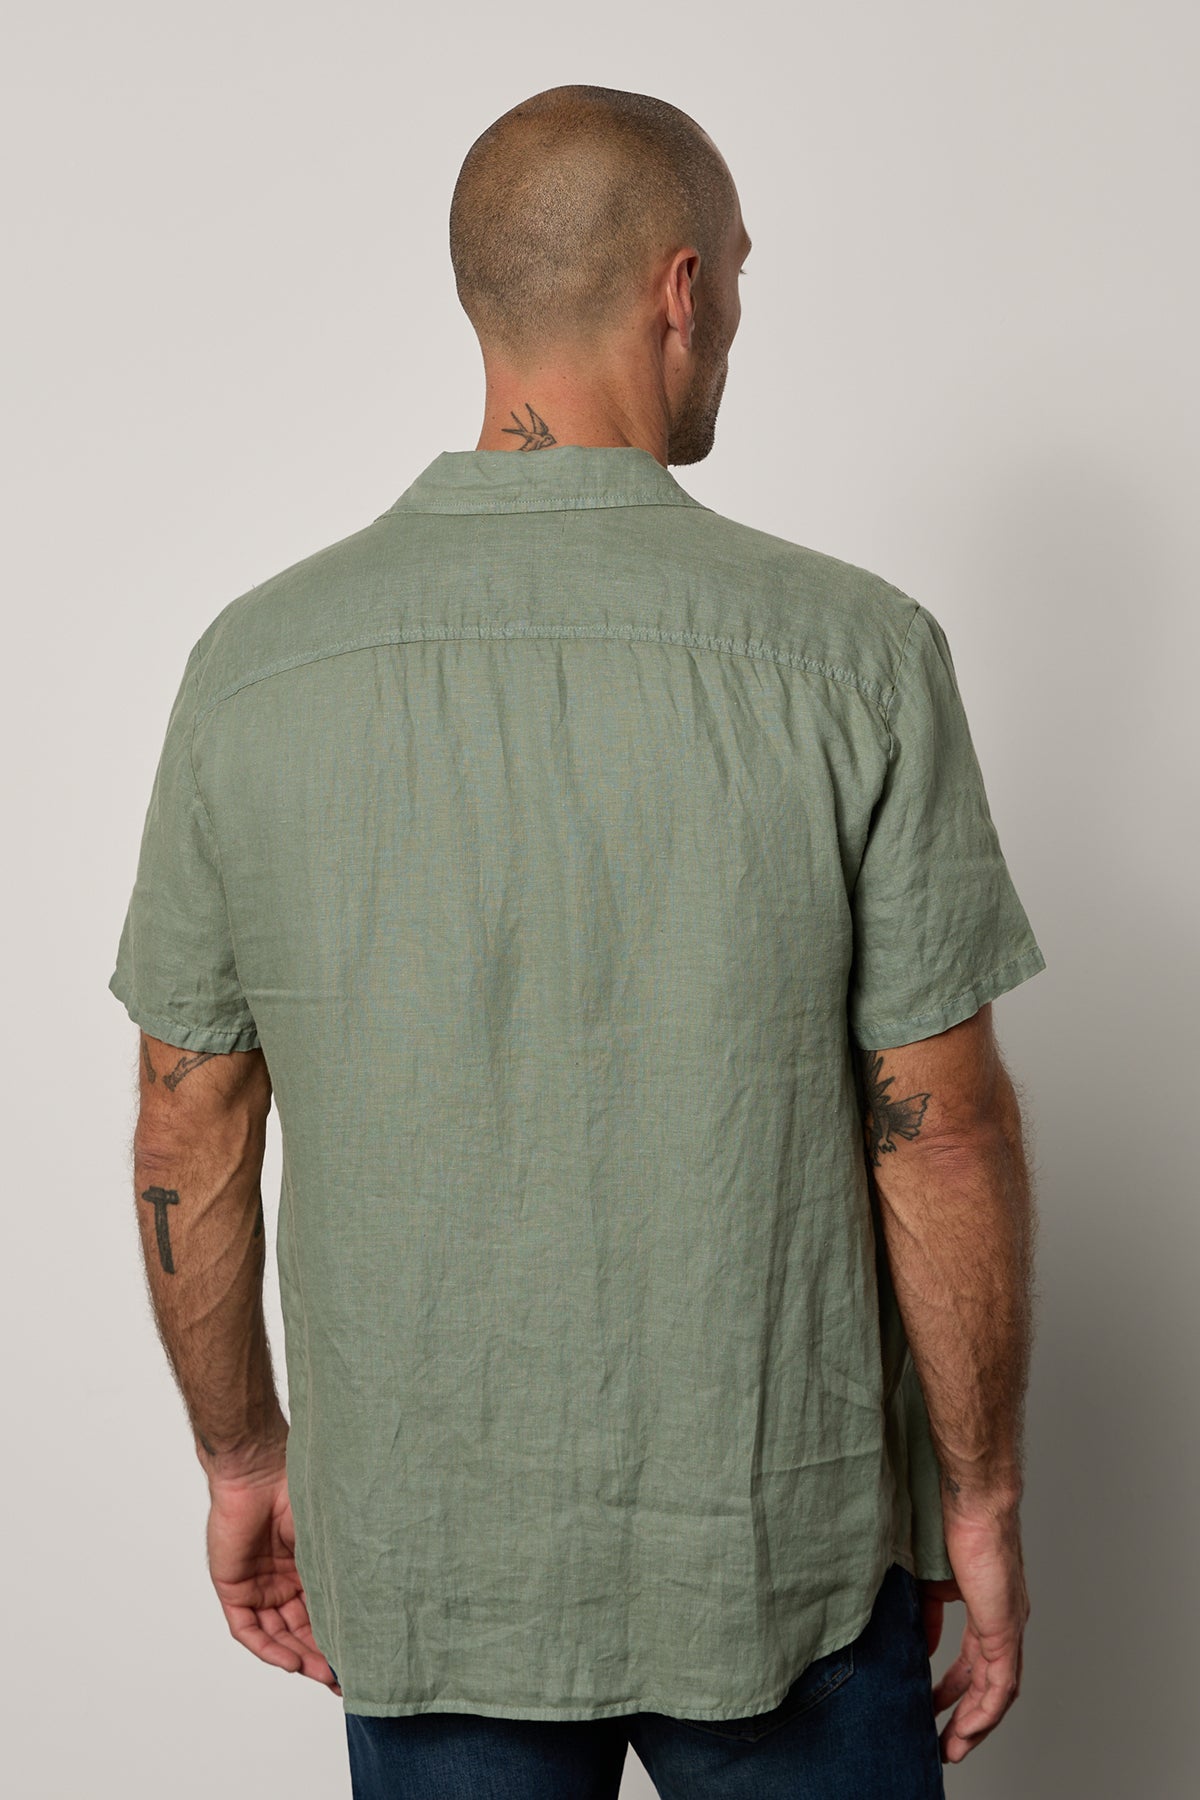   Mackie Button-Up Shirt in cactus soft green with dark blue denim back 